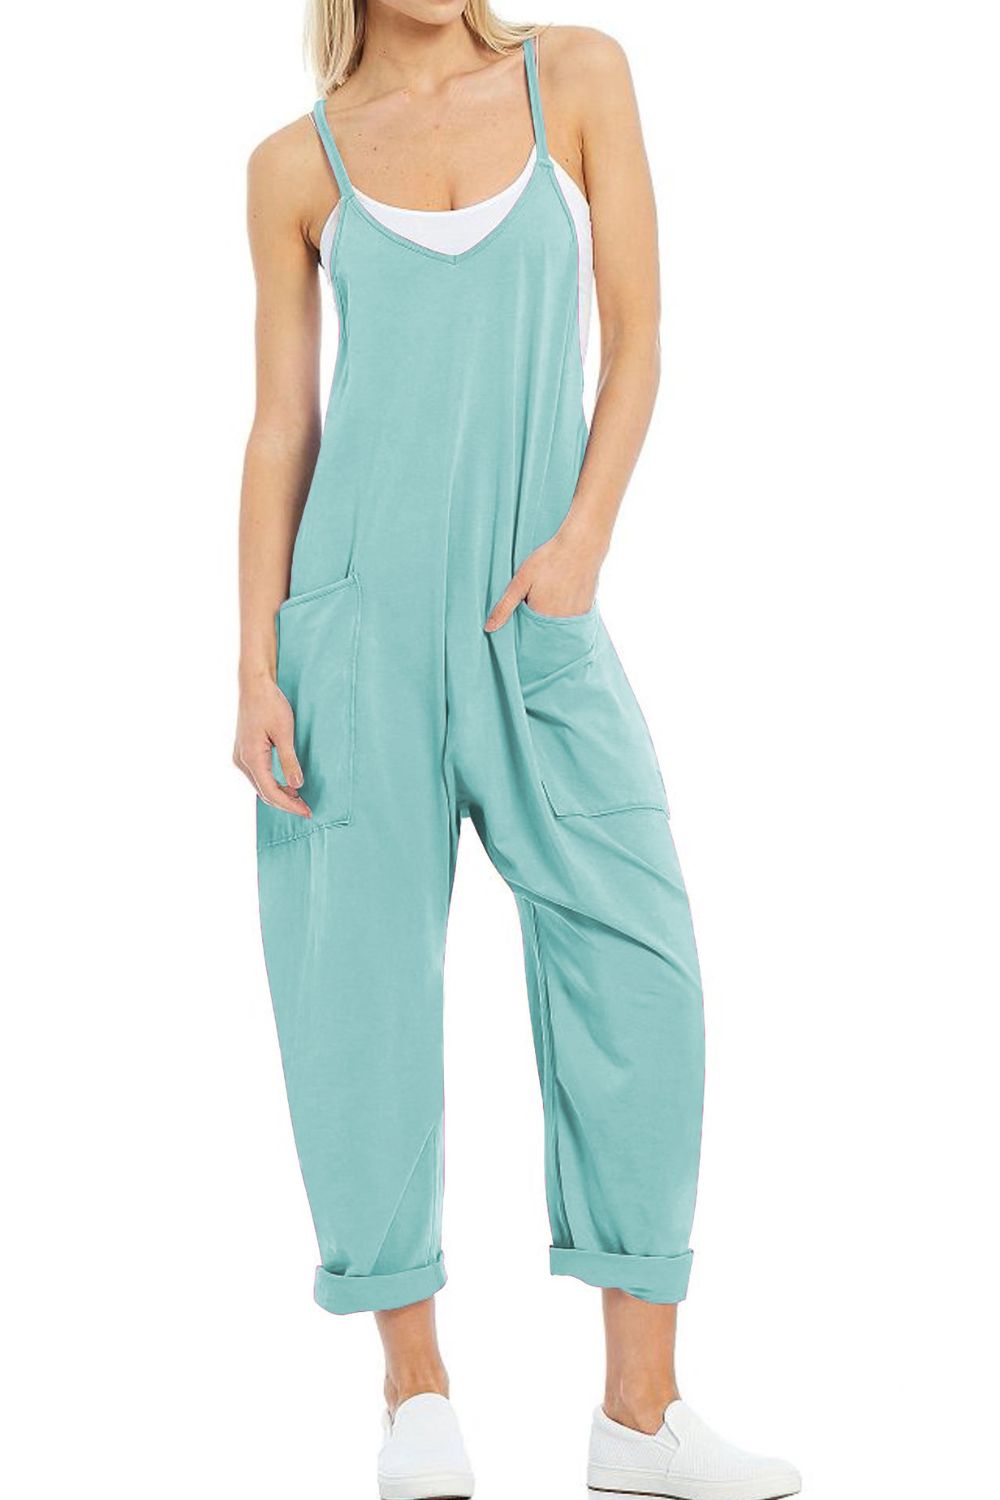 Spaghetti Strap Jumpsuit with Pockets - 7 Colors